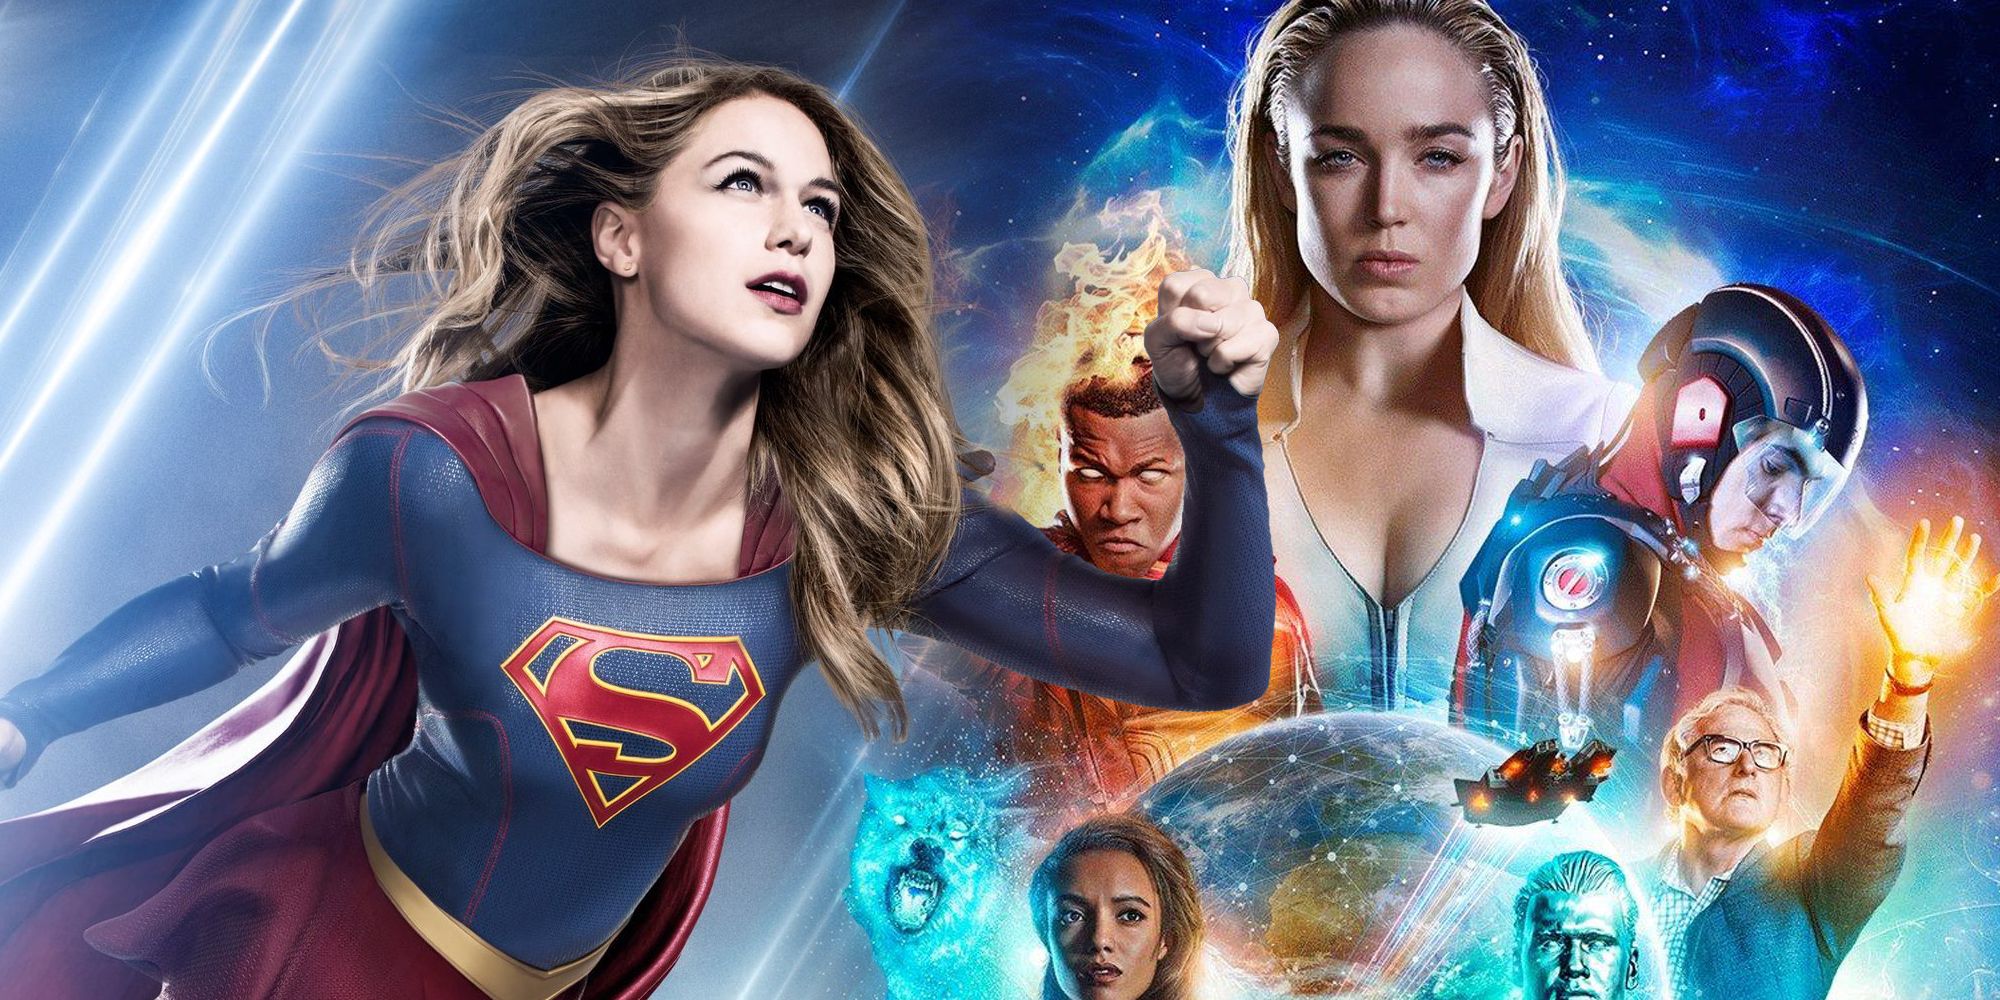 Supergirl Legends of Tomorrow The CW